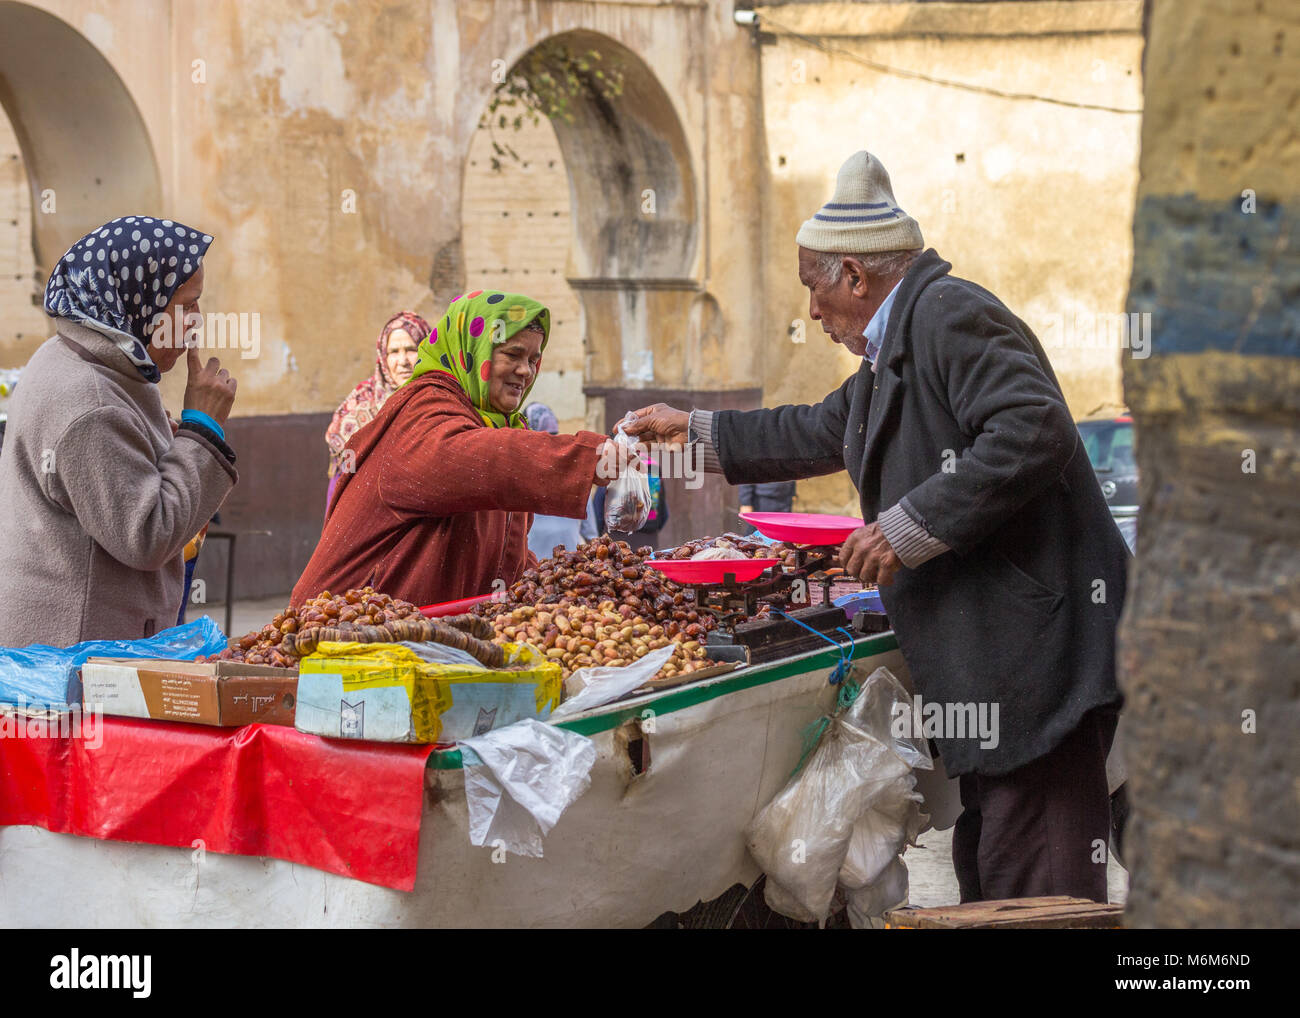 An elderly woman buys dates from a street seller, selling from a cart in the muslim quarter of Fes el-Jedid, Res, Morocco Stock Photo